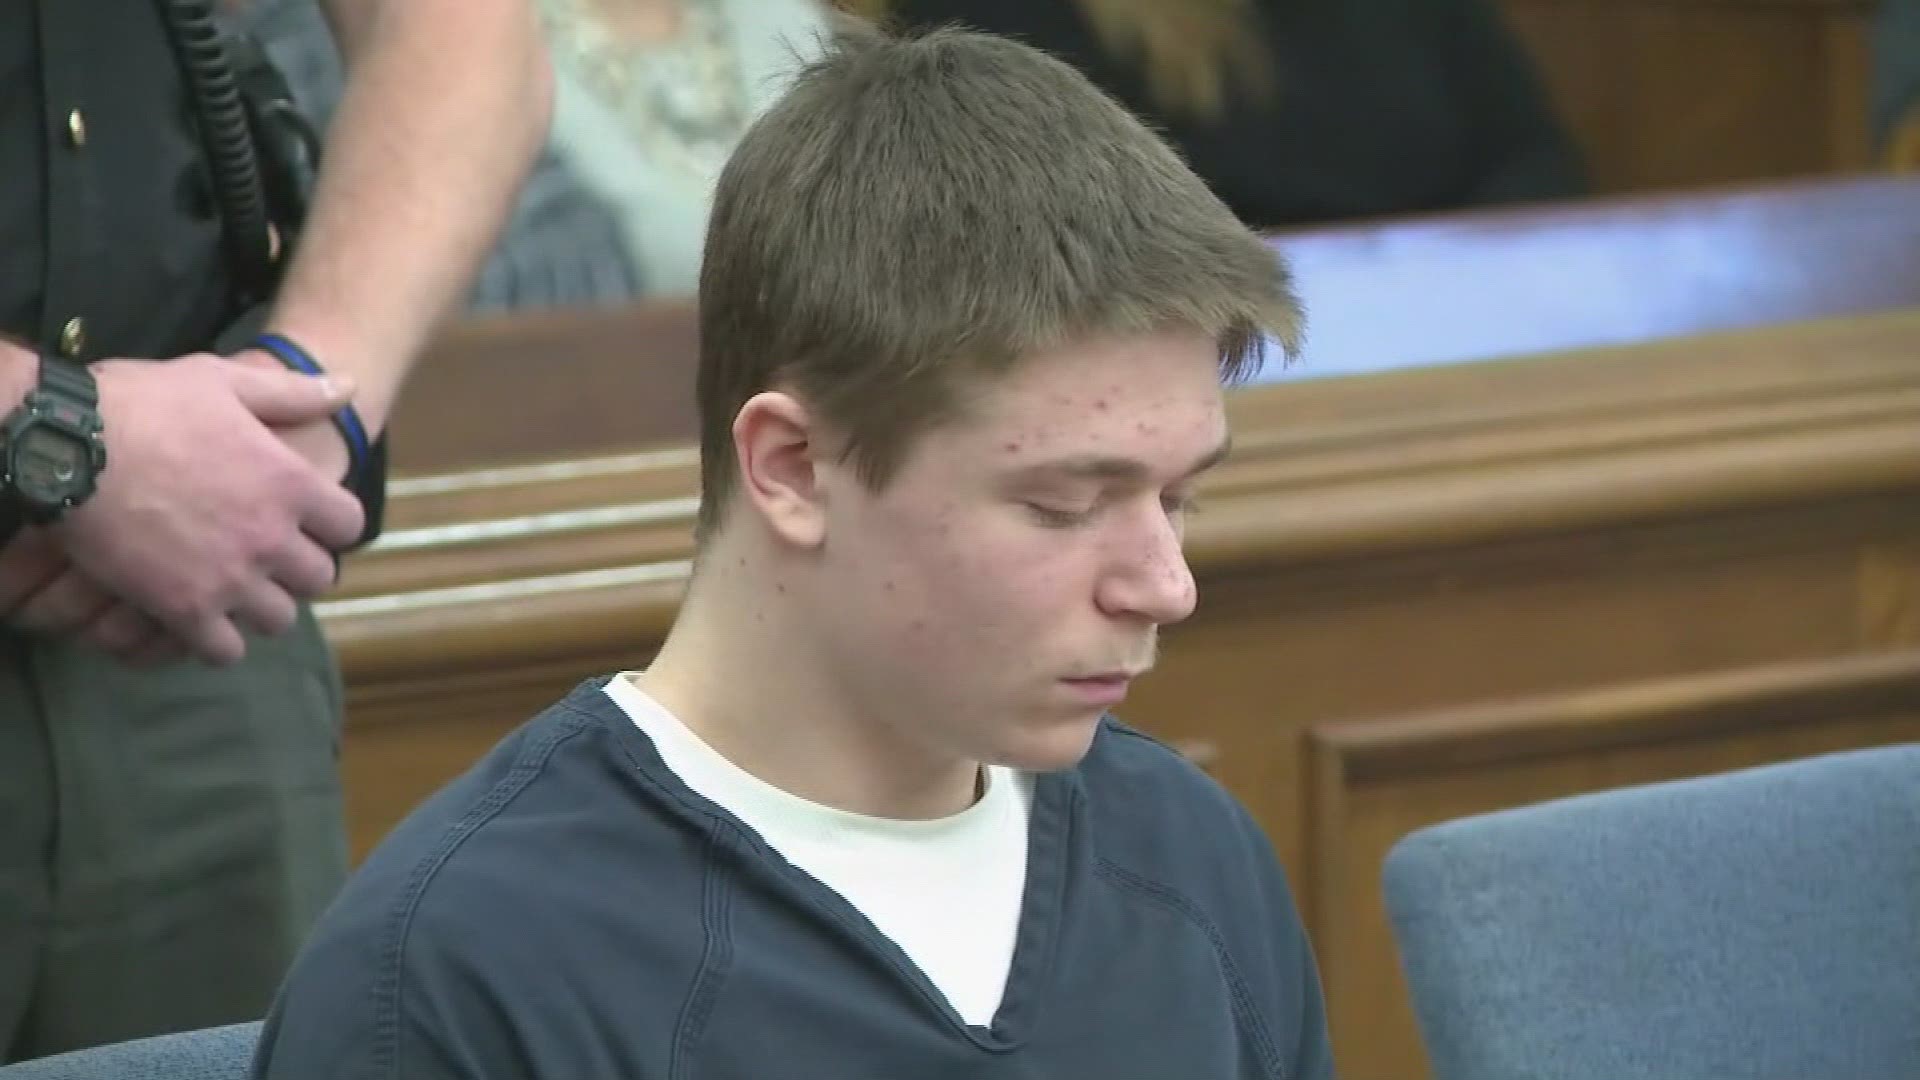 After changing his plea to no contest, a 17-year-old was found guilty of killing a 98-year-old Wadsworth woman.